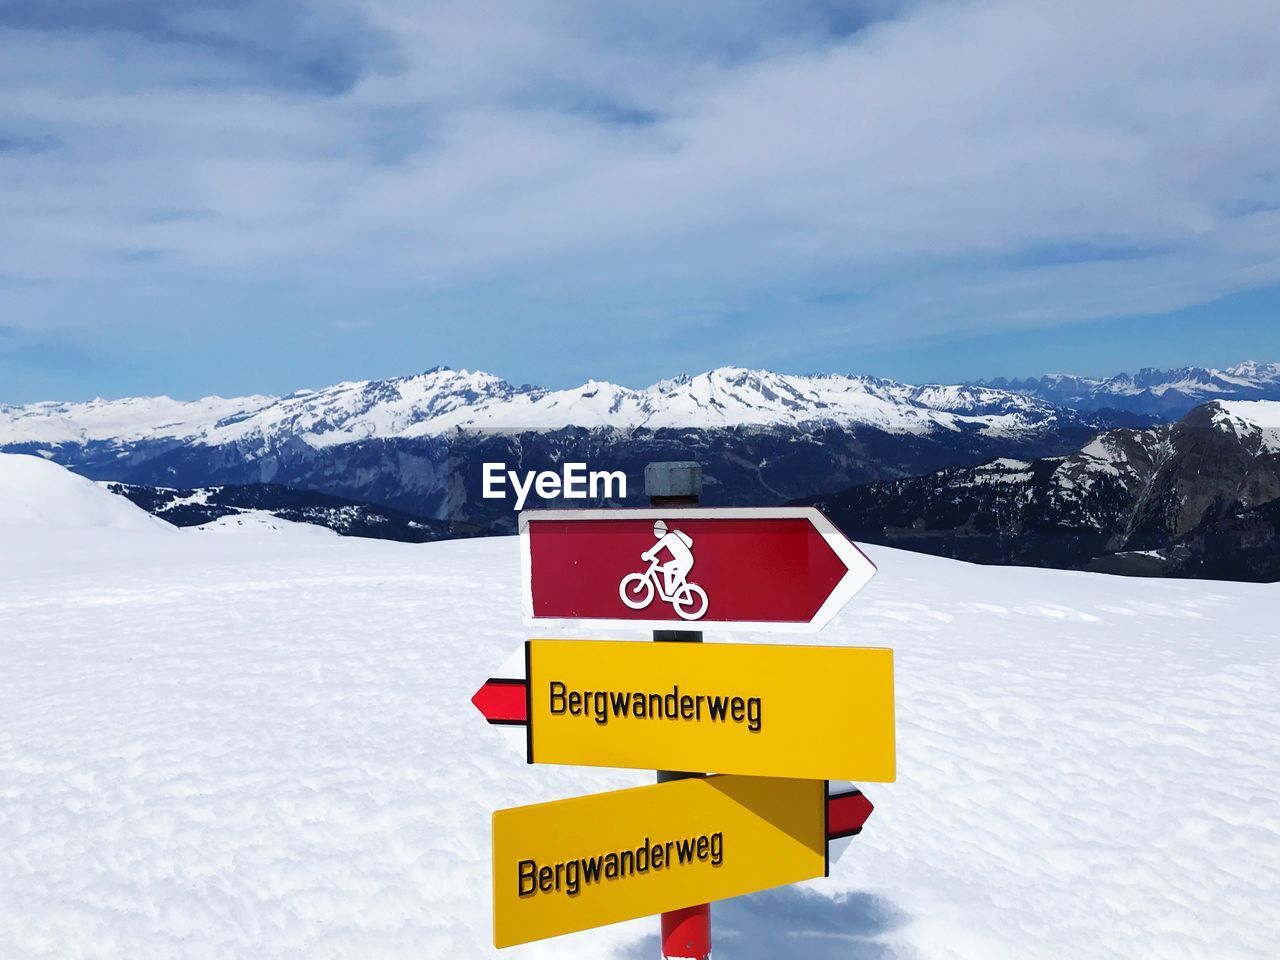 INFORMATION SIGN AGAINST SNOWCAPPED MOUNTAINS DURING WINTER